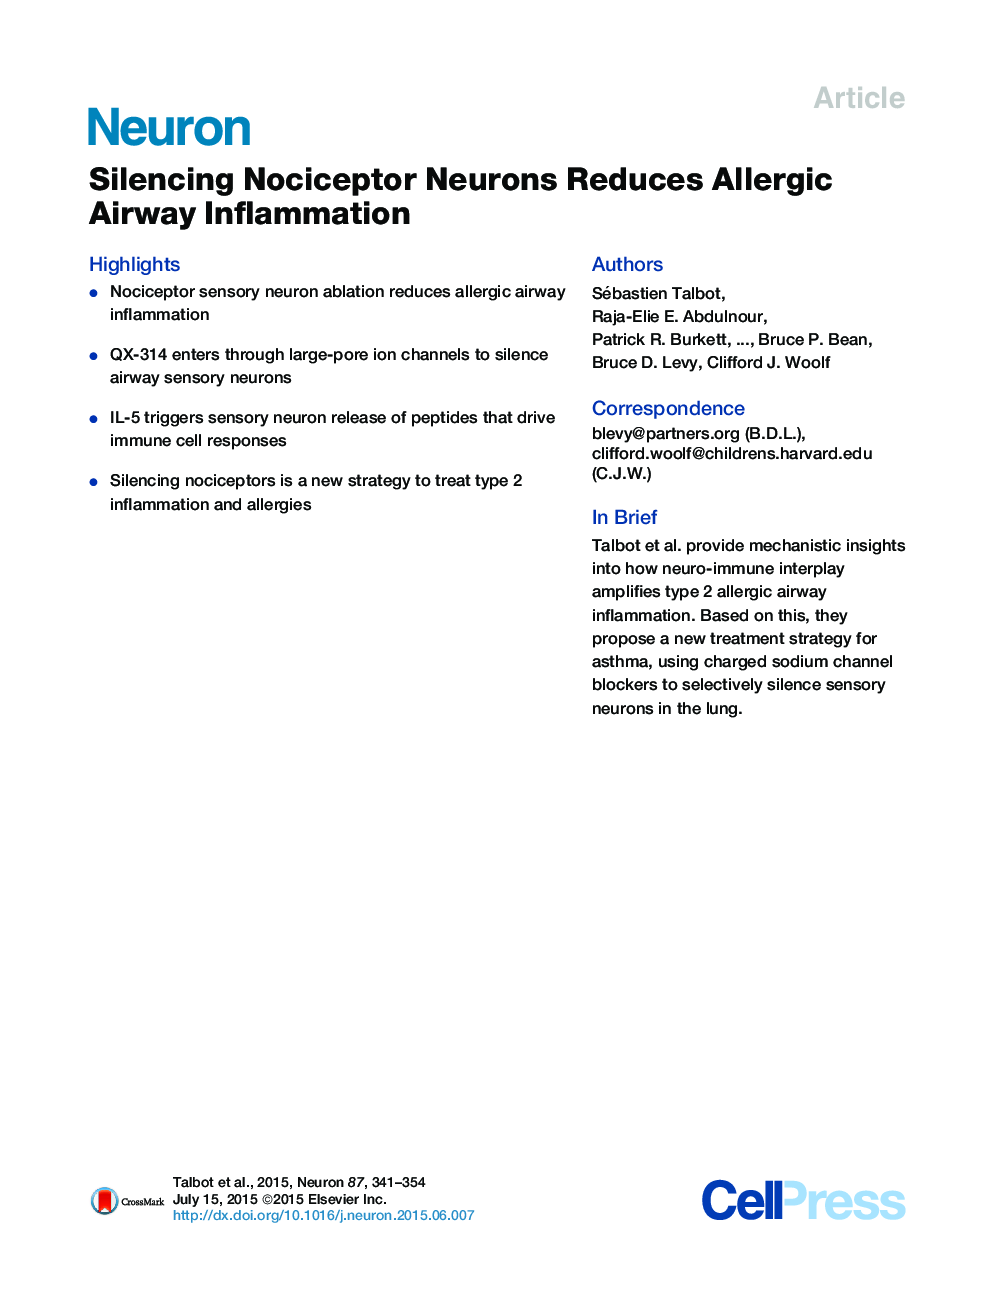 Silencing Nociceptor Neurons Reduces Allergic Airway Inflammation